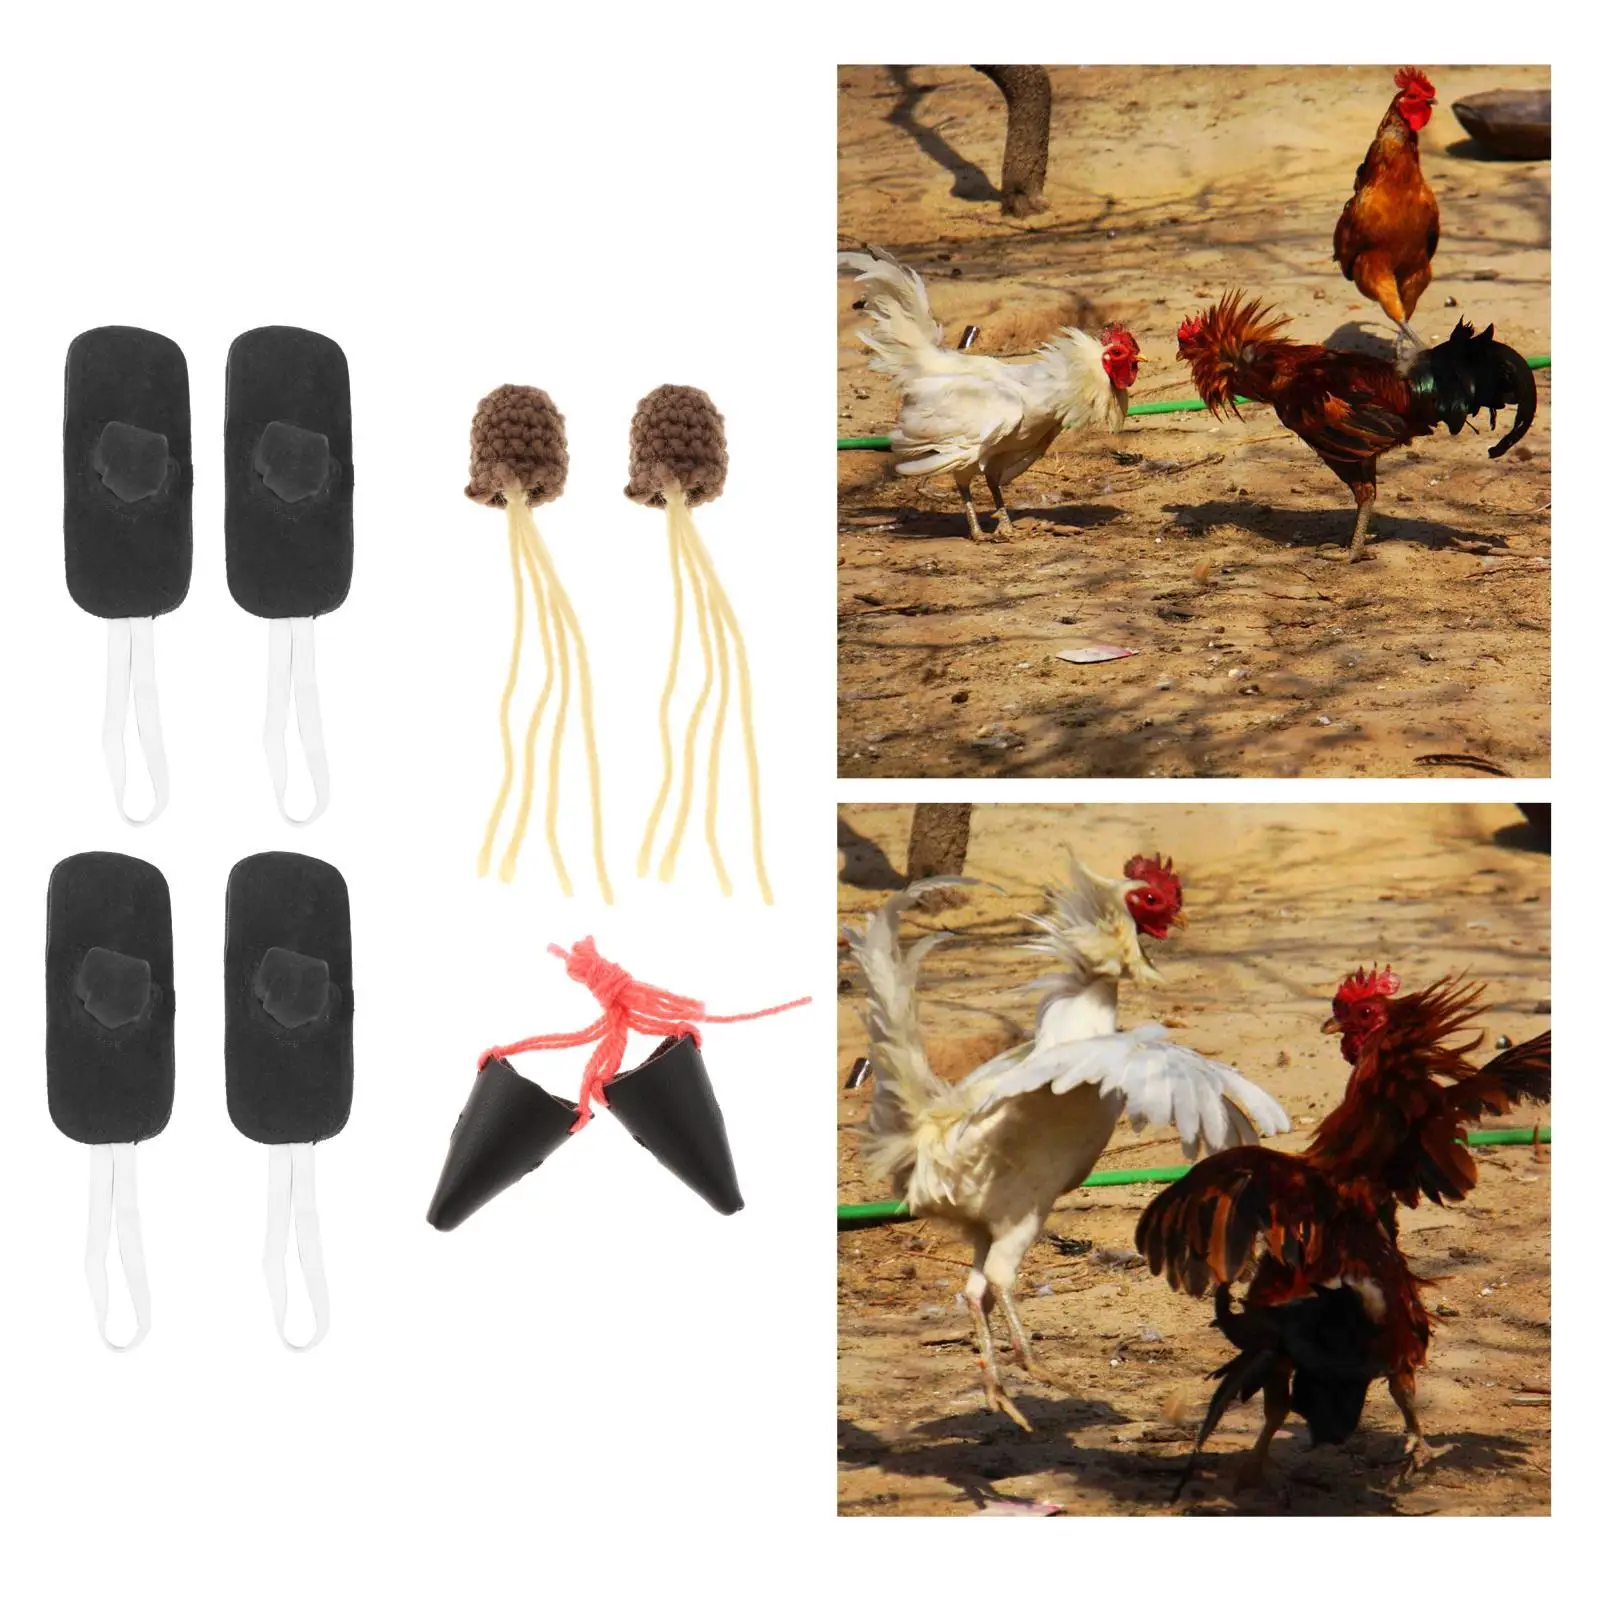 2 Set Fighting Foot Cover W/ Mouth Cover Safety Protection Supplies Gamefowl Chicken Mitt Durable Cockfighting Foot Cover